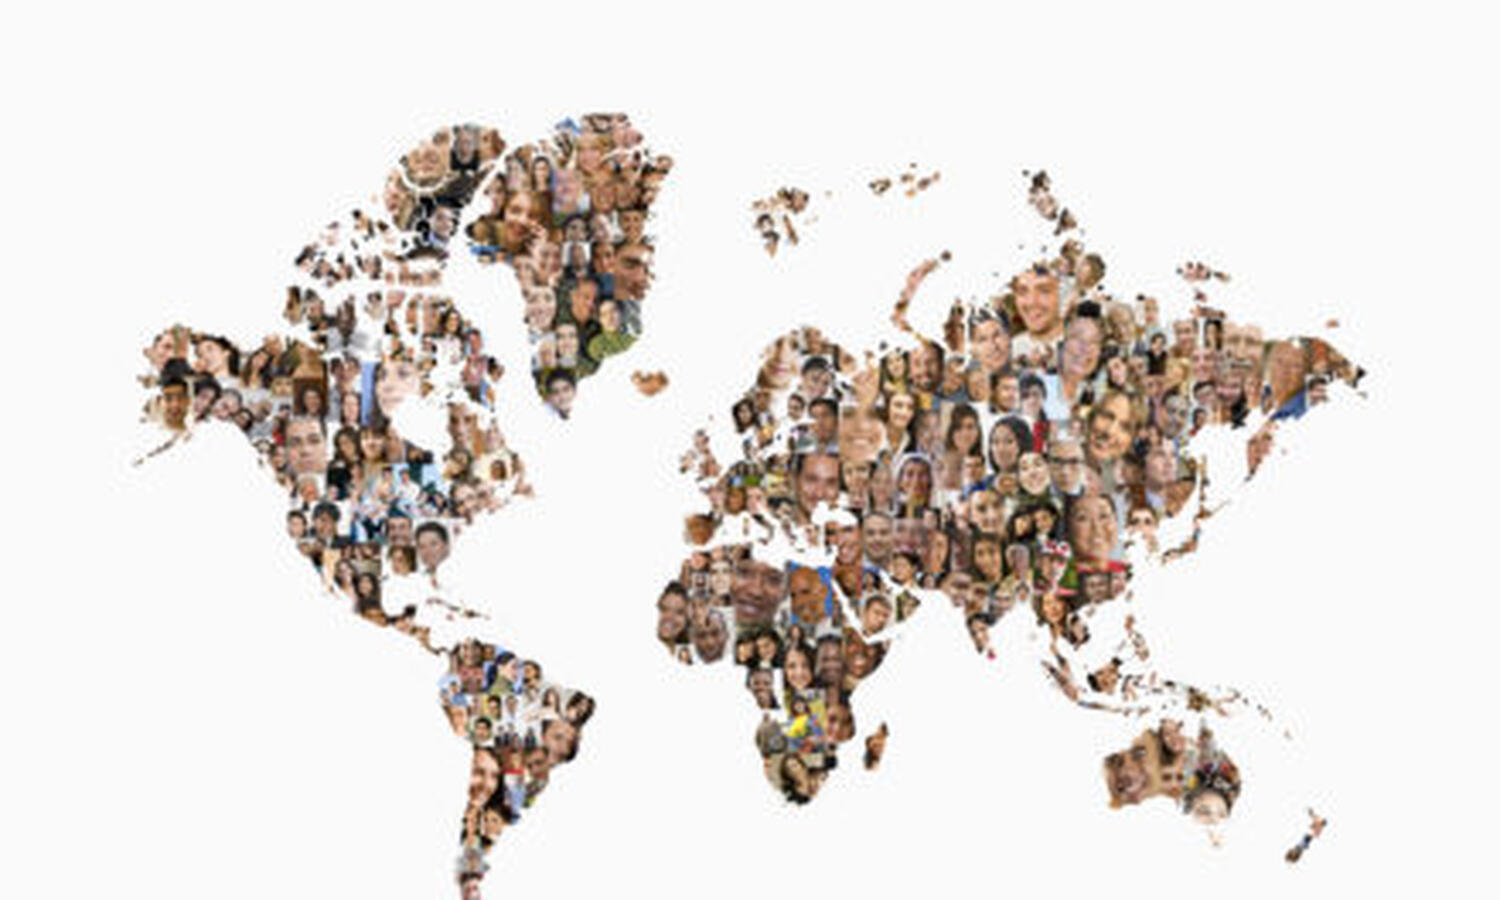 Image of World map created from people of different races and ethnicities